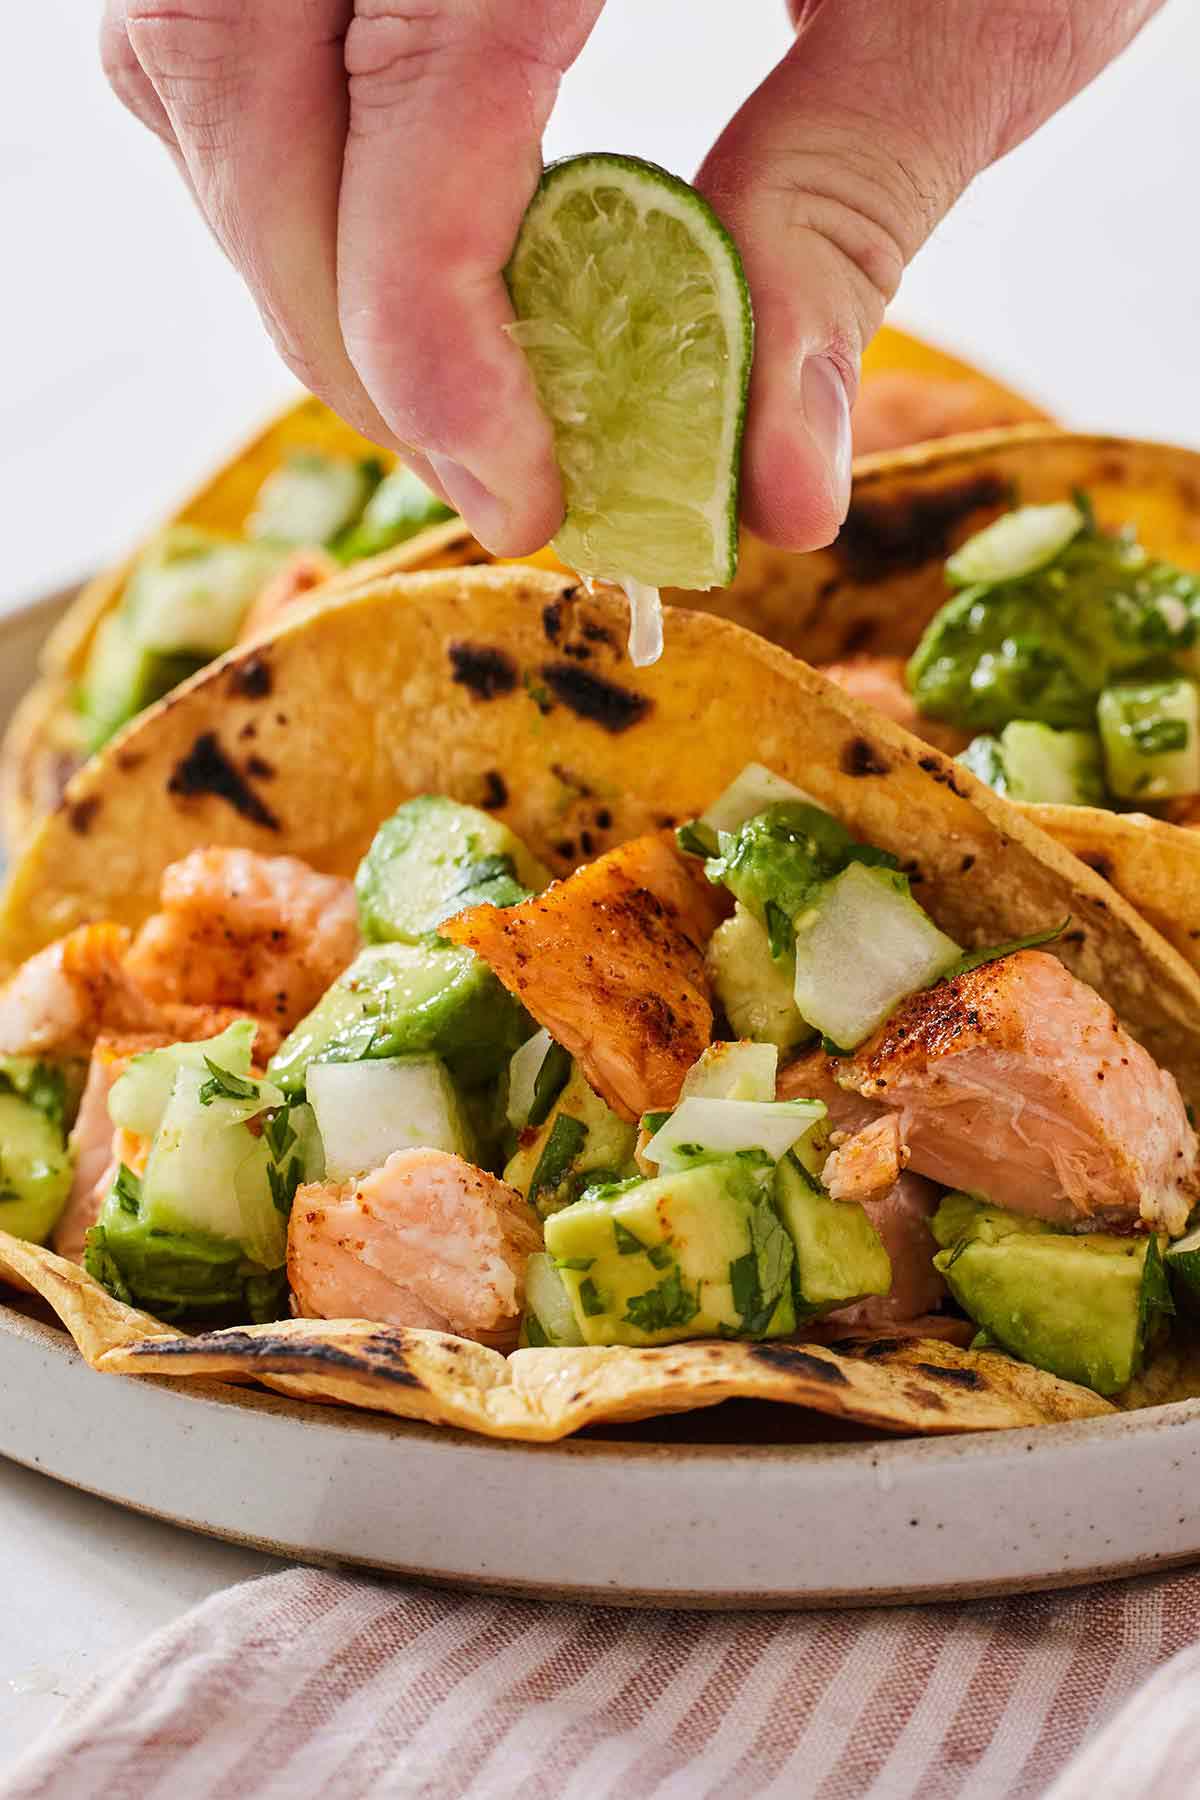 Lime wedge being squeezed over a salmon taco.